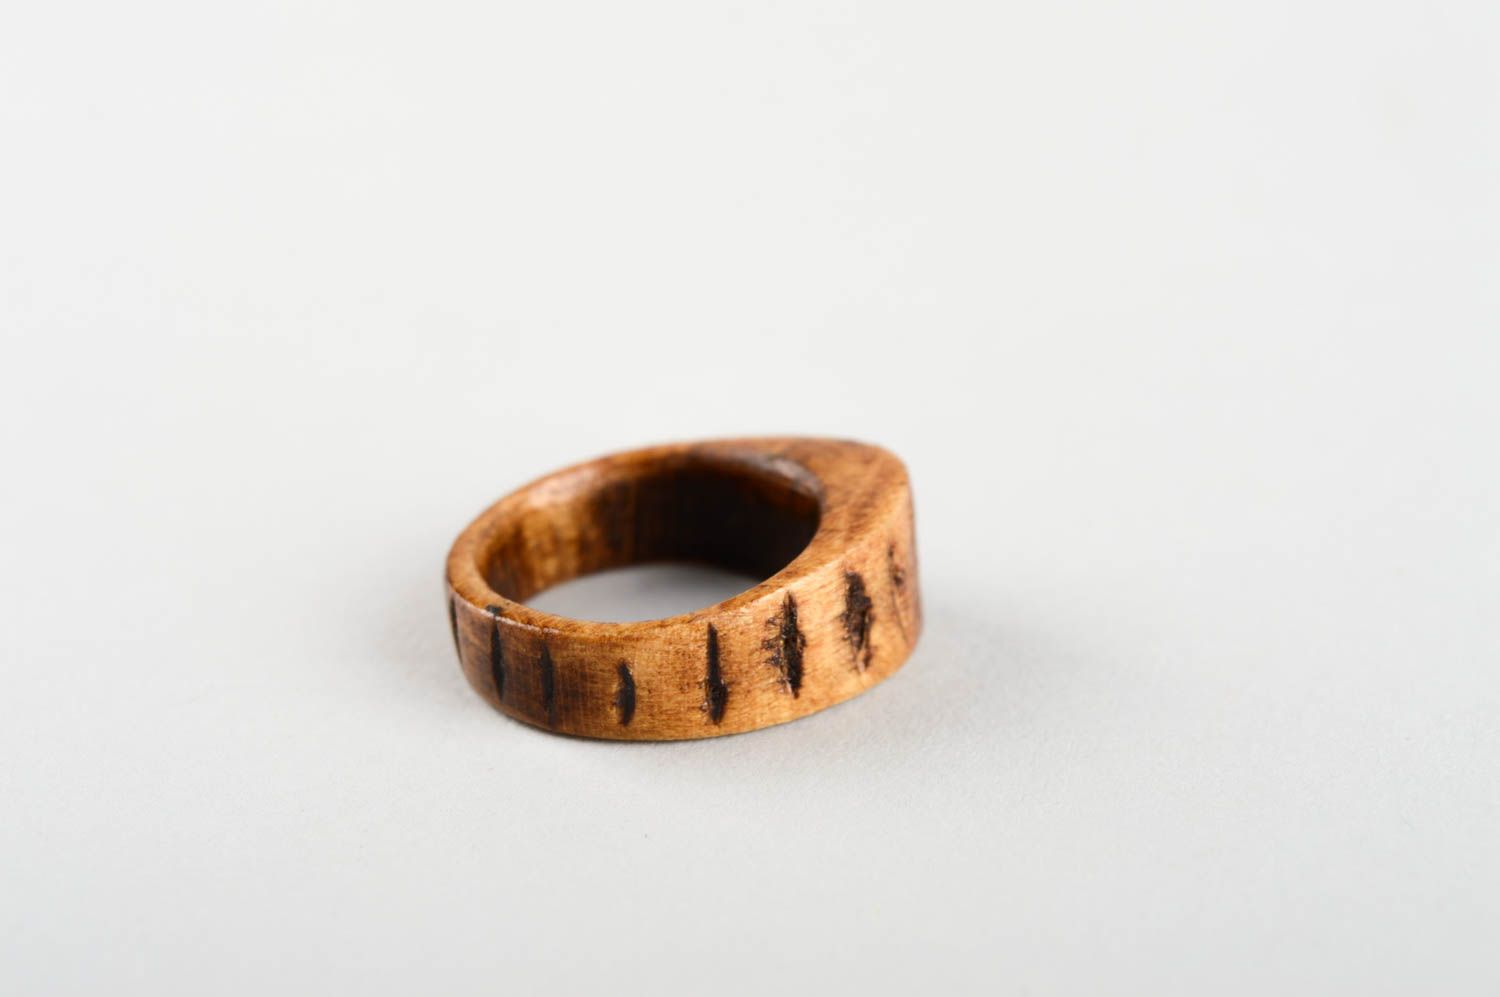 Unusual handmade wooden ring fashion accessories wood craft gifts for her photo 4